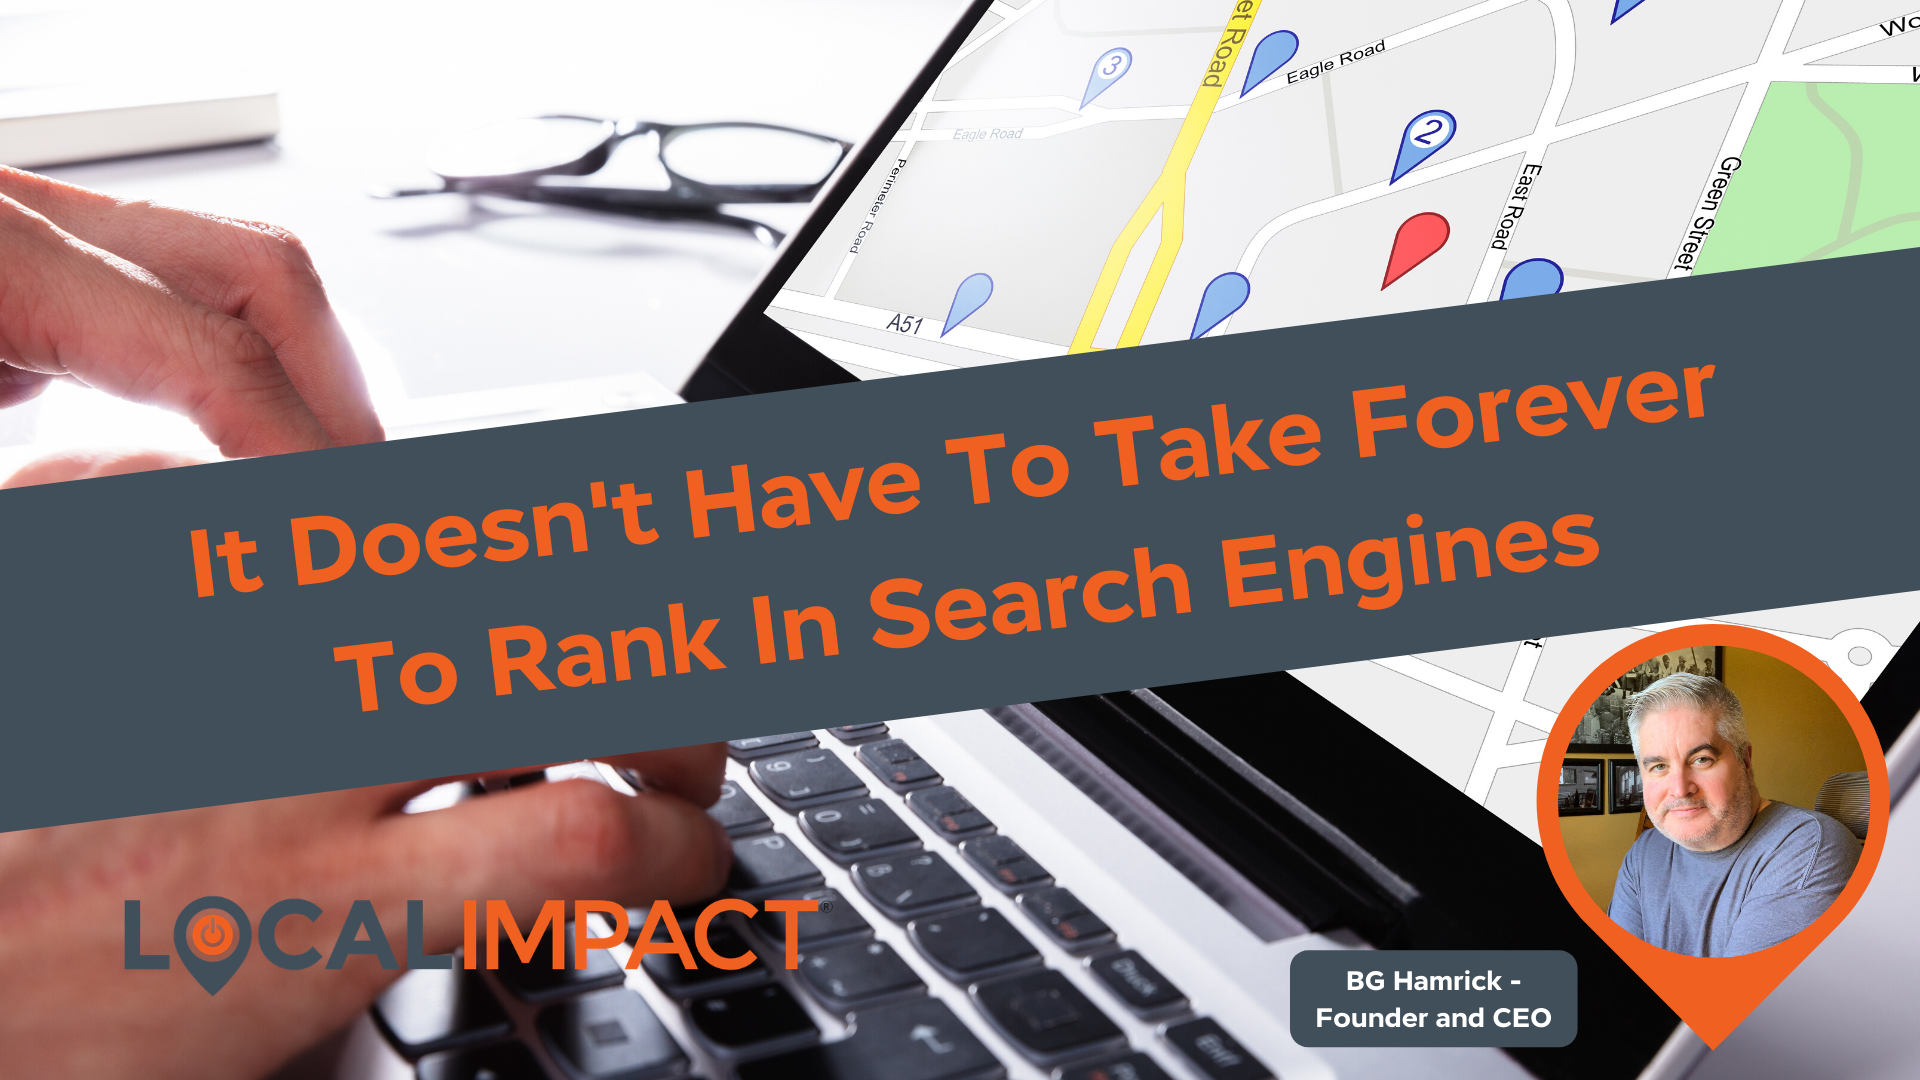 It Doesn't Have To Take Forever To Rank in Search Engines- Local Impact